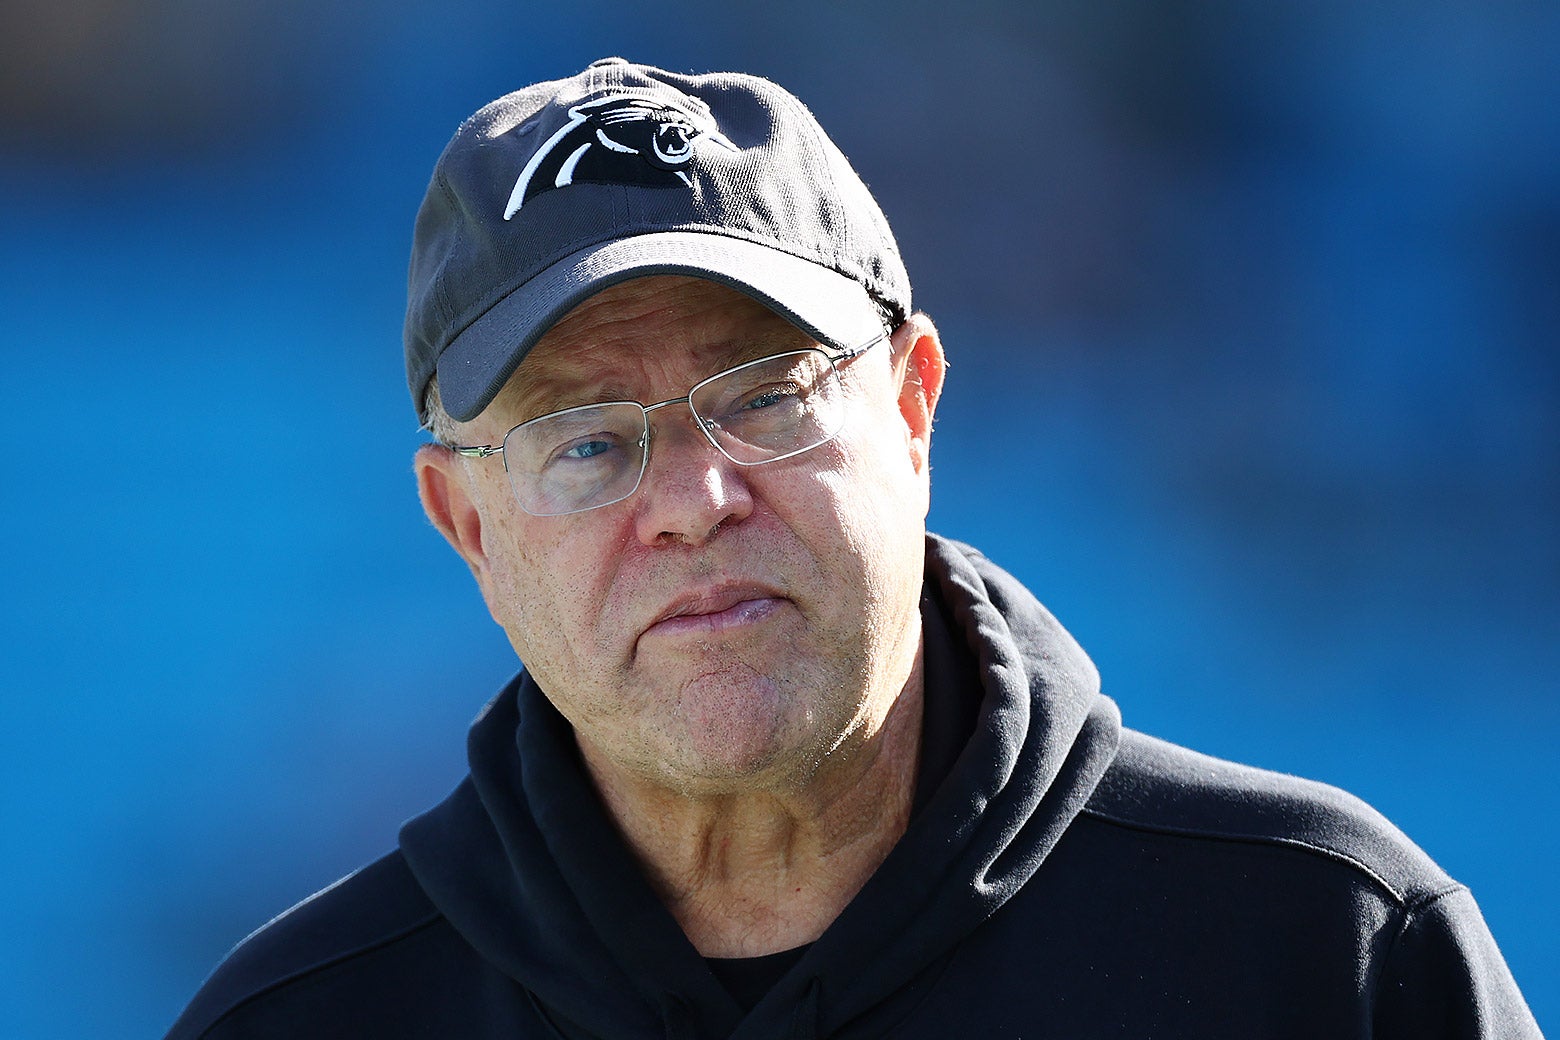 David Tepper in a Panthers hat and hoodie, frowning